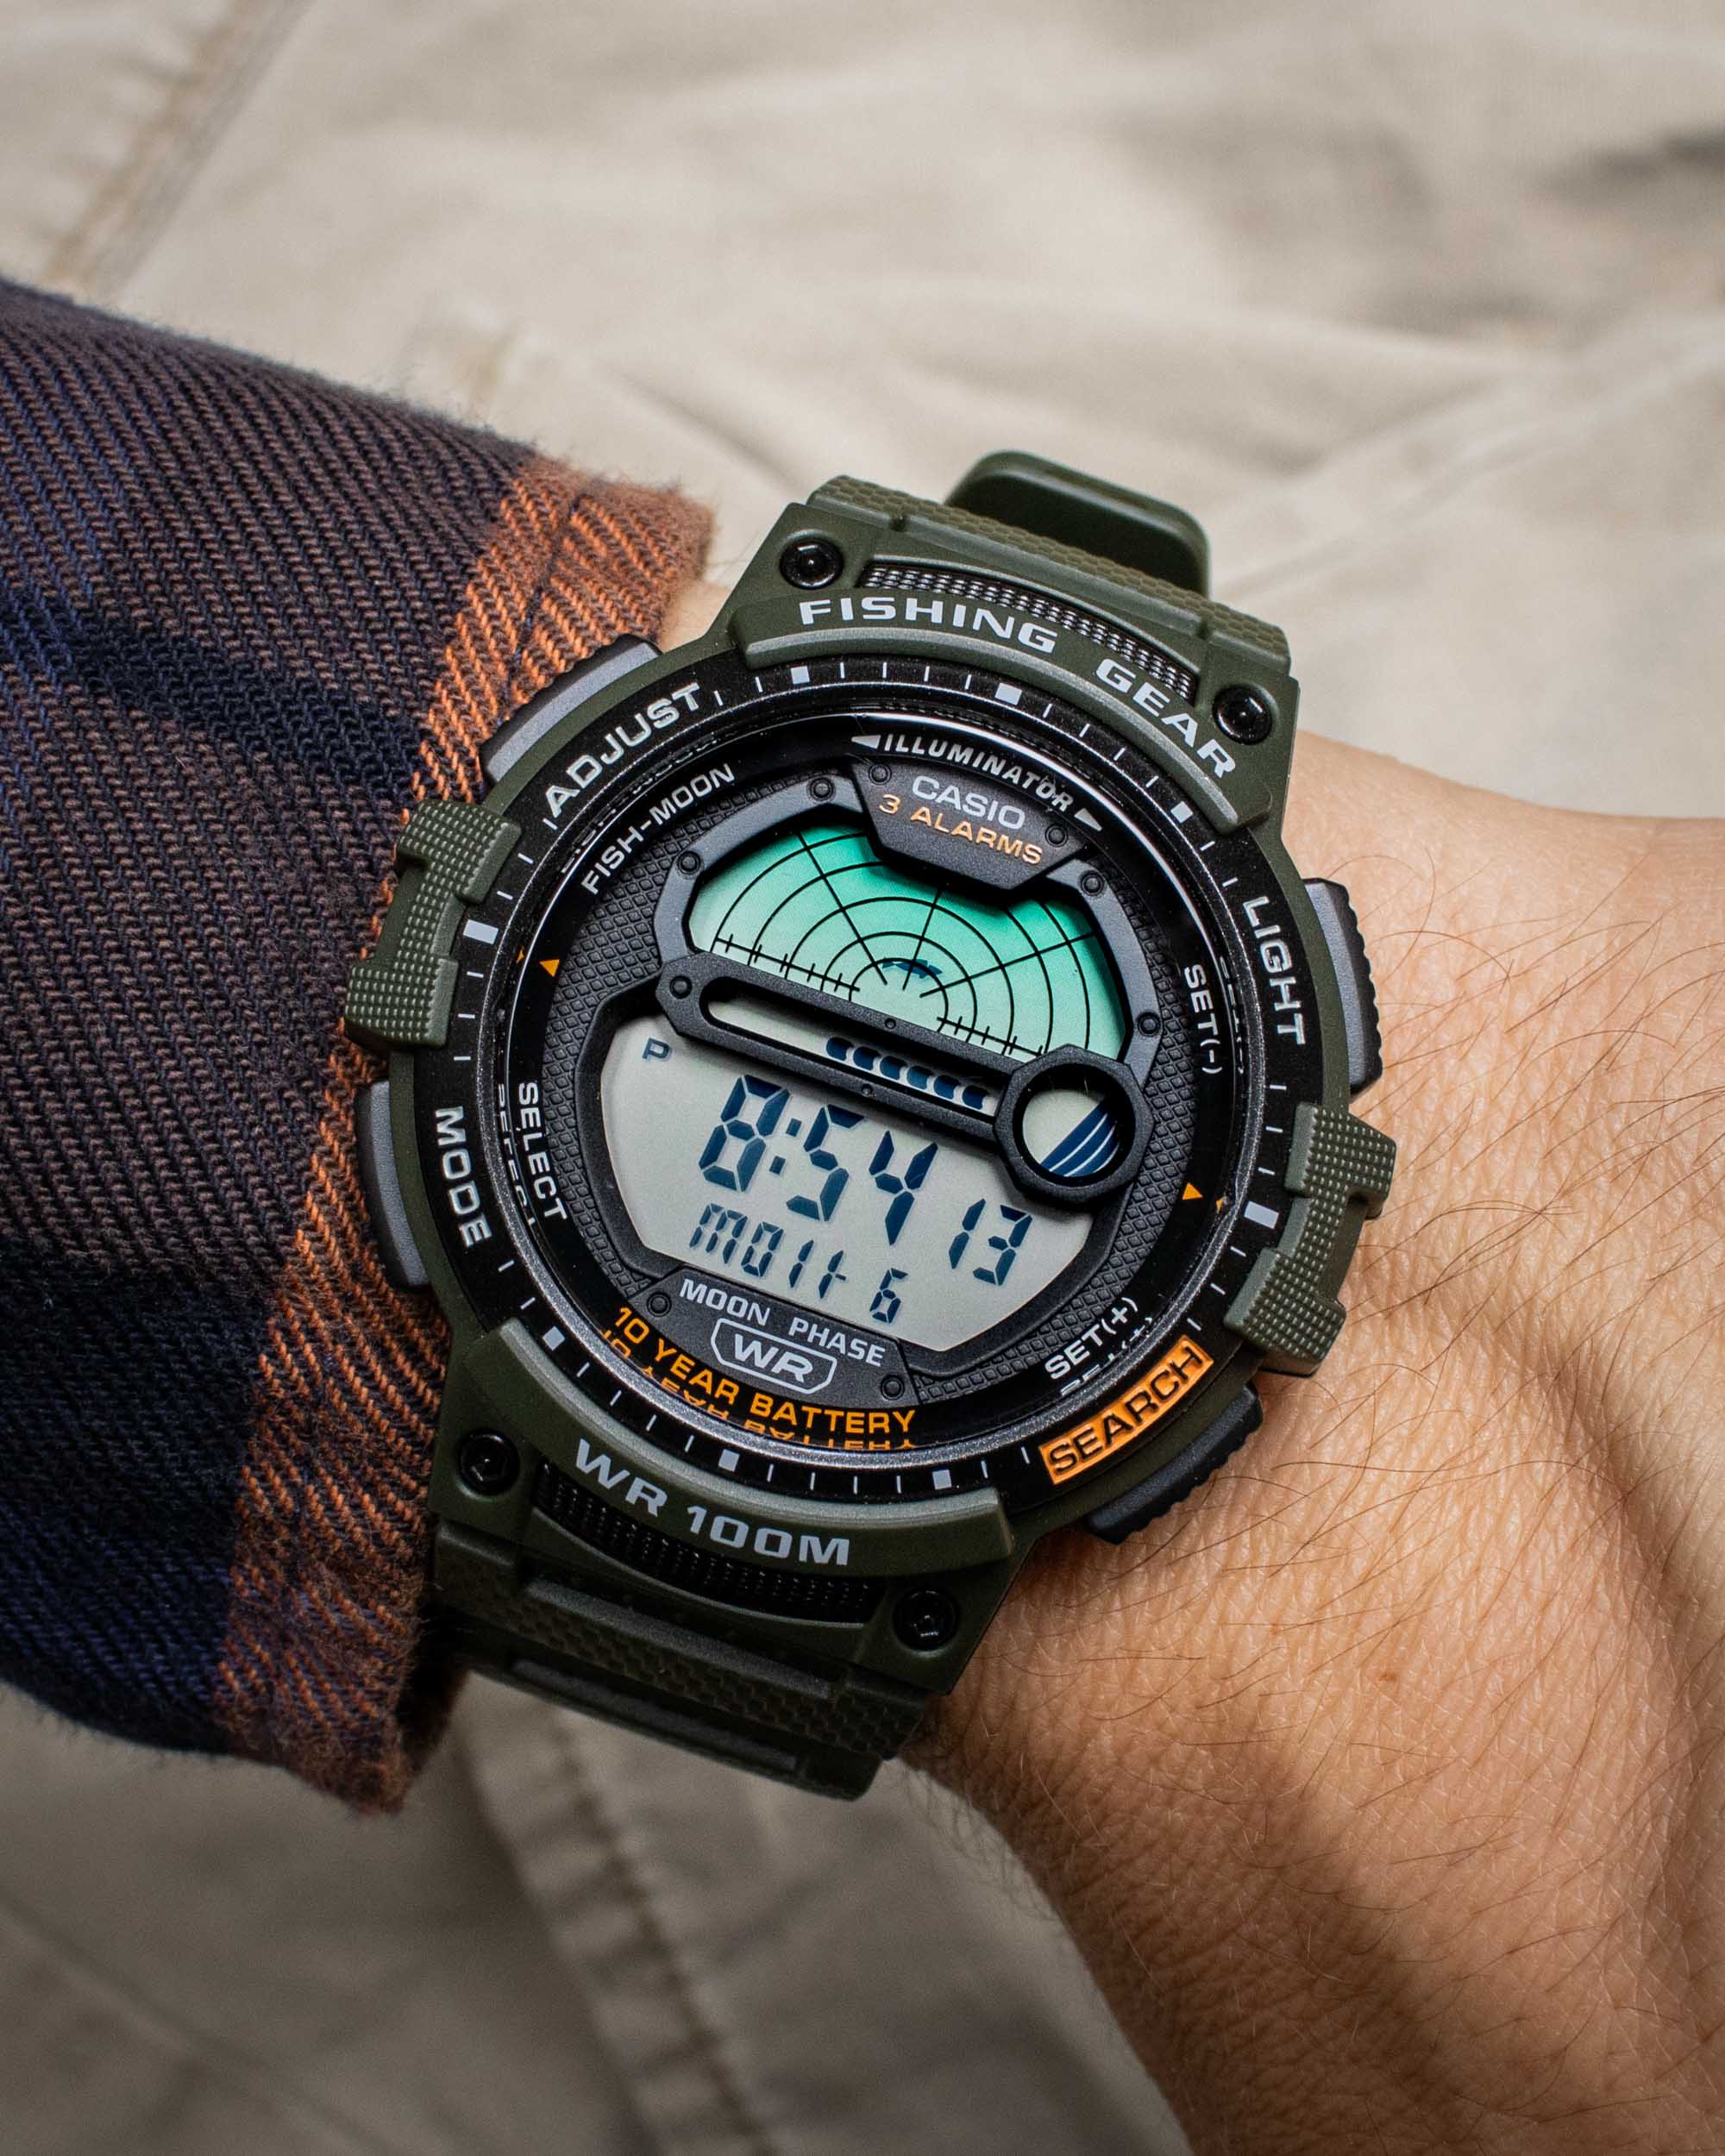 The Casio 3485 Fishing Watch (Does it Really Work) 